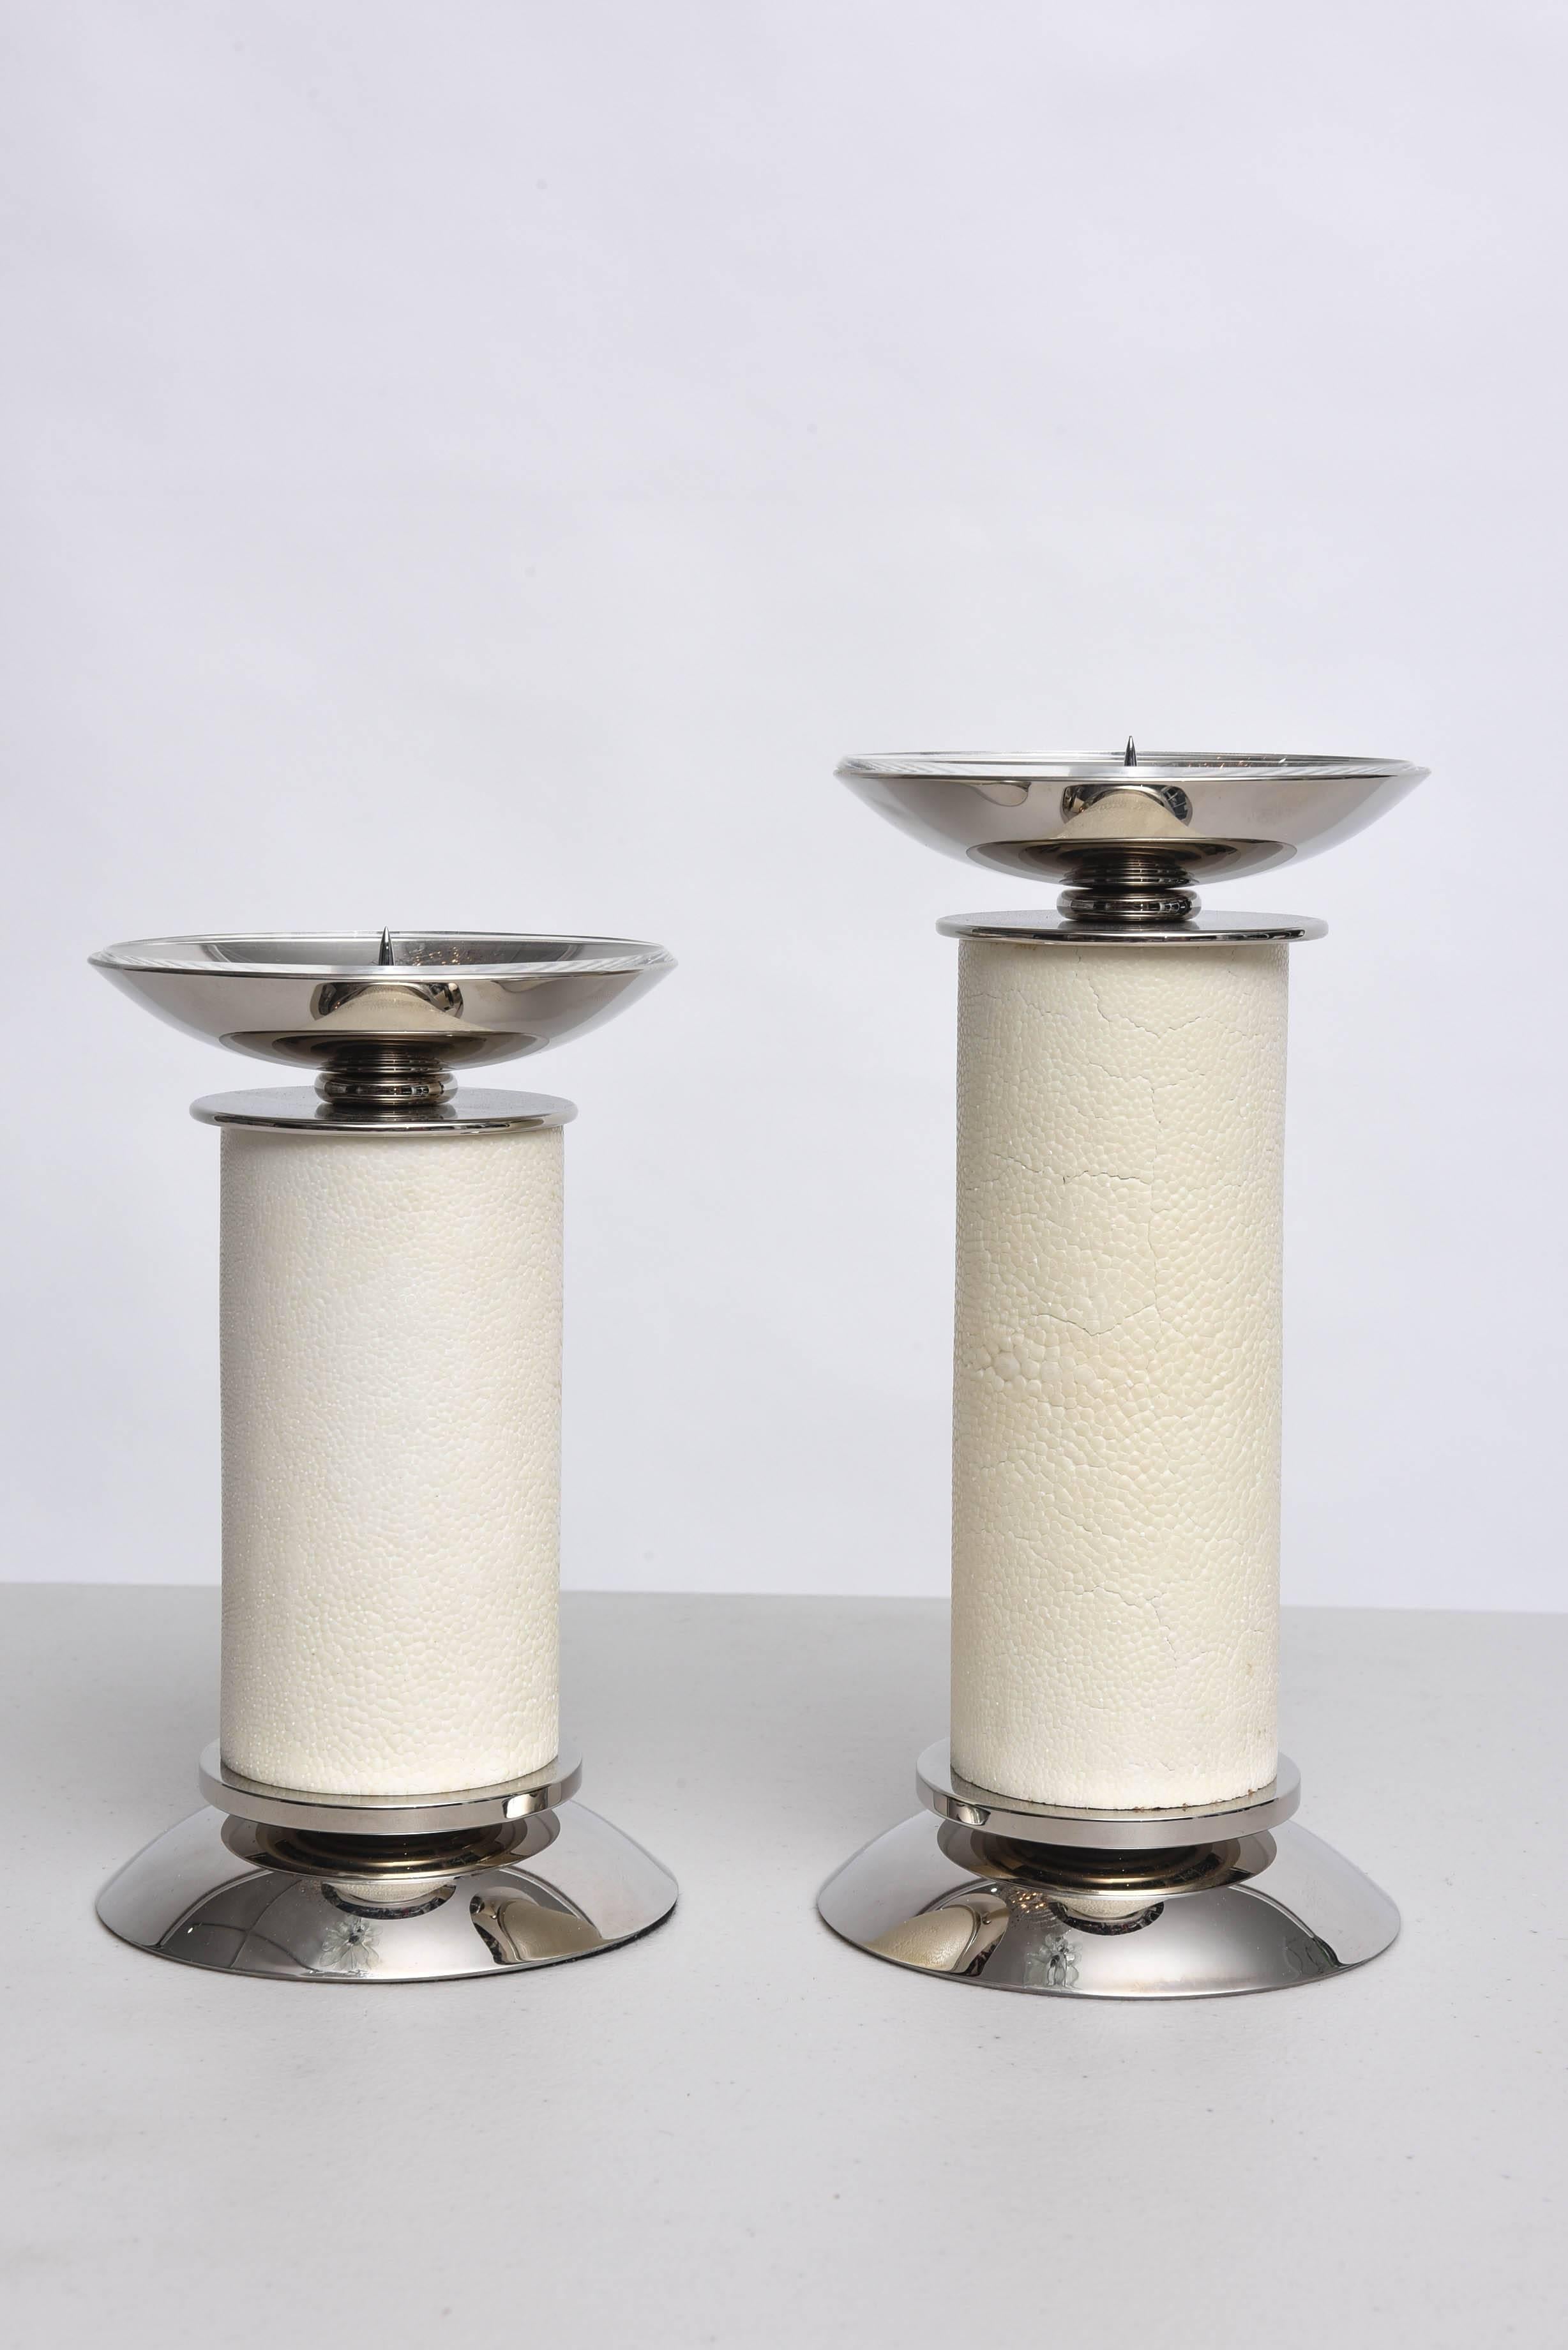 20th Century Two Piece Set of Karl Springer Candlesticks Ivory Shagreen and Nickel-Plated 